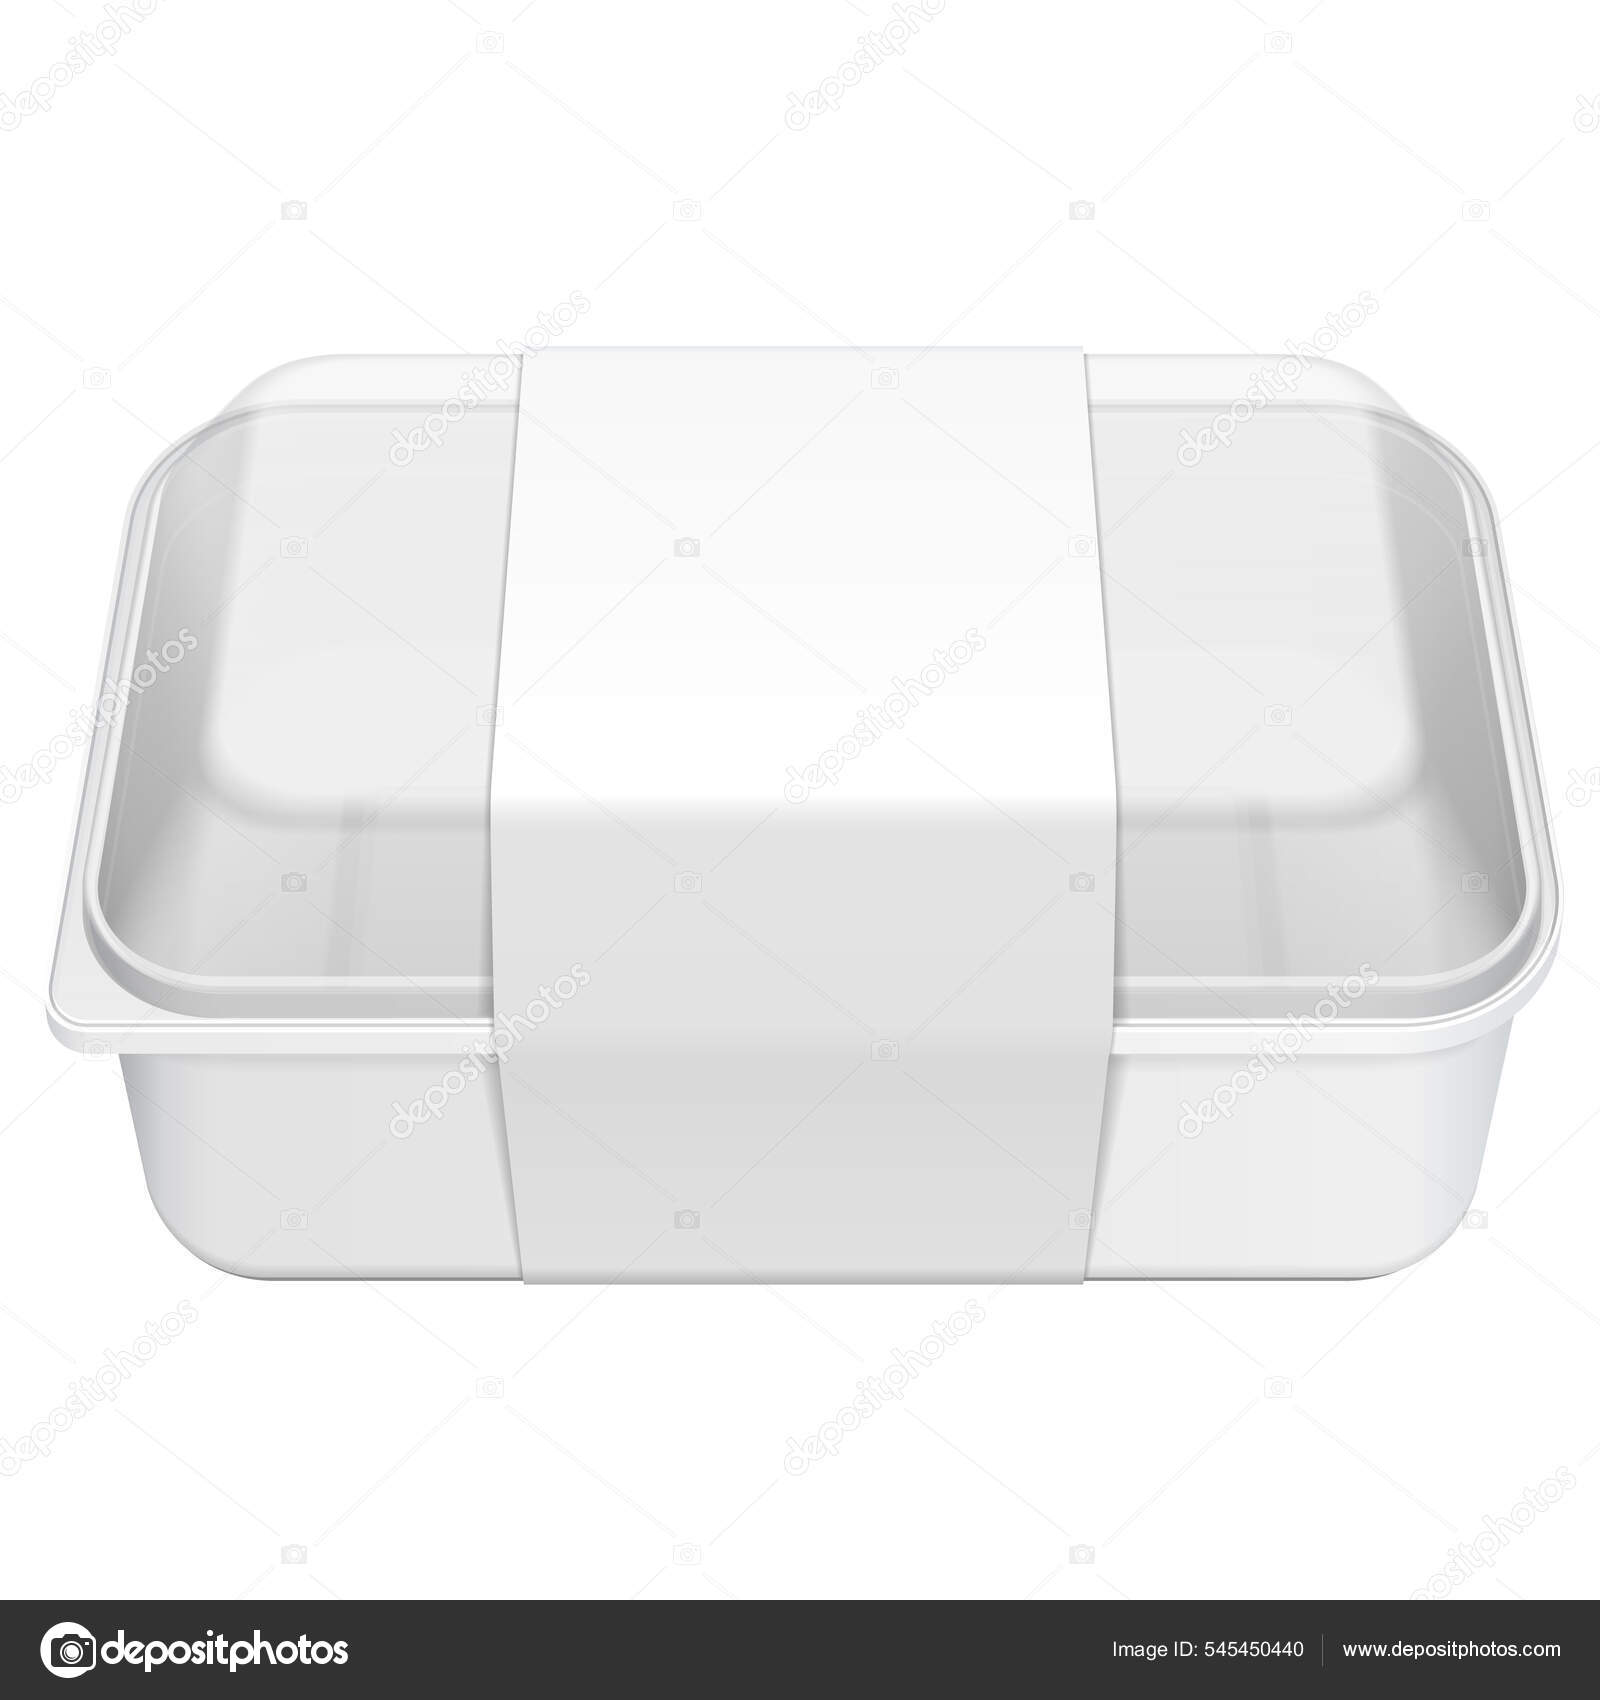 Plastic food container lunch box with a lid isolated on white